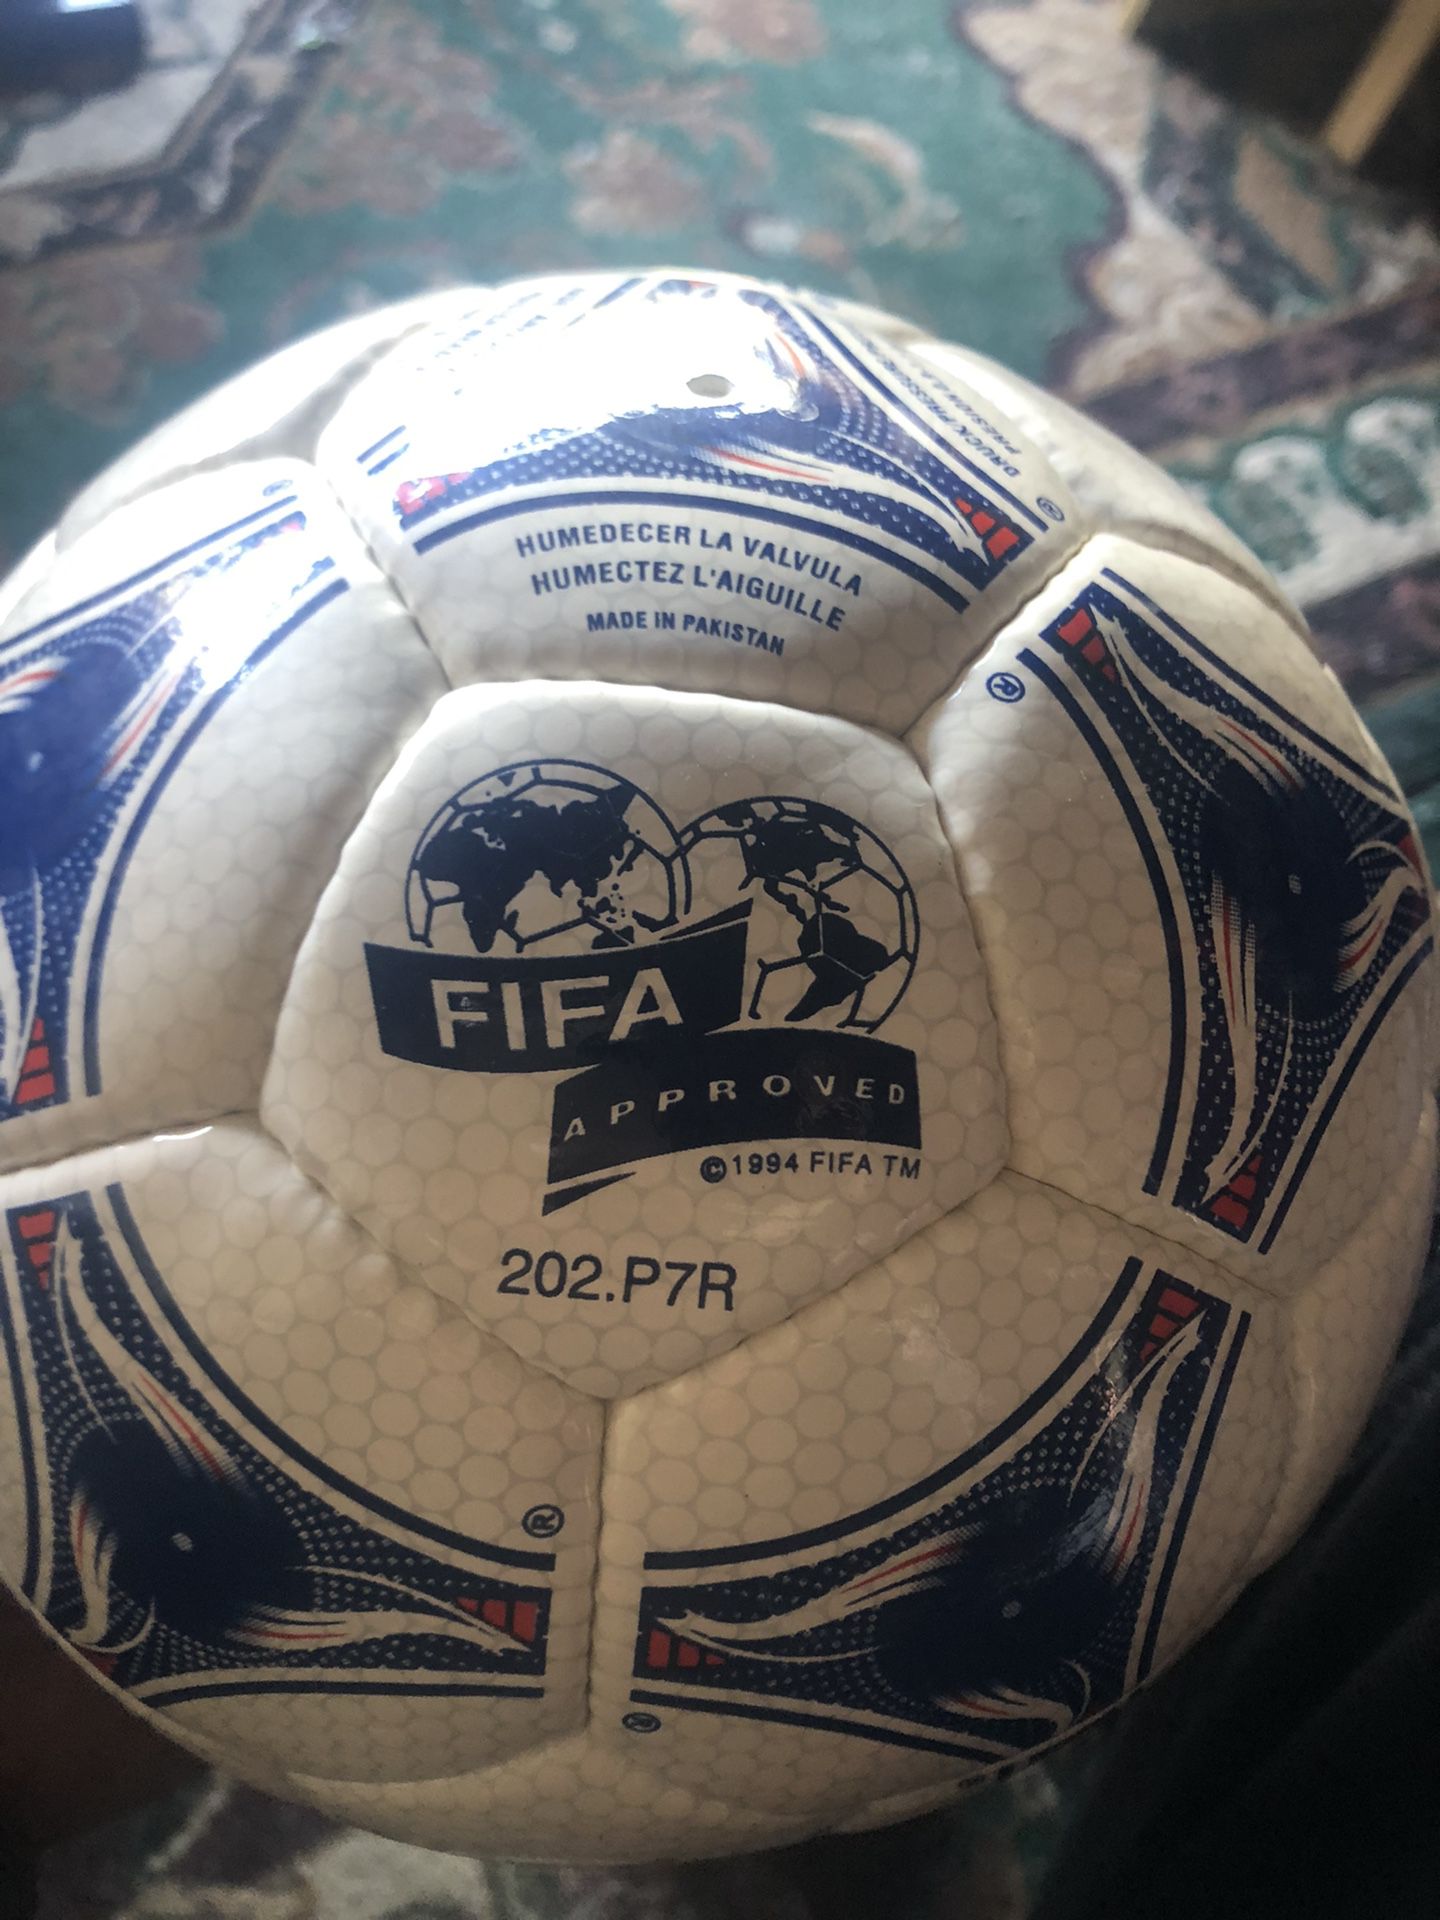 Fifa World Cup 1998 Official Soccer Ball for Sale in Los Angeles, CA